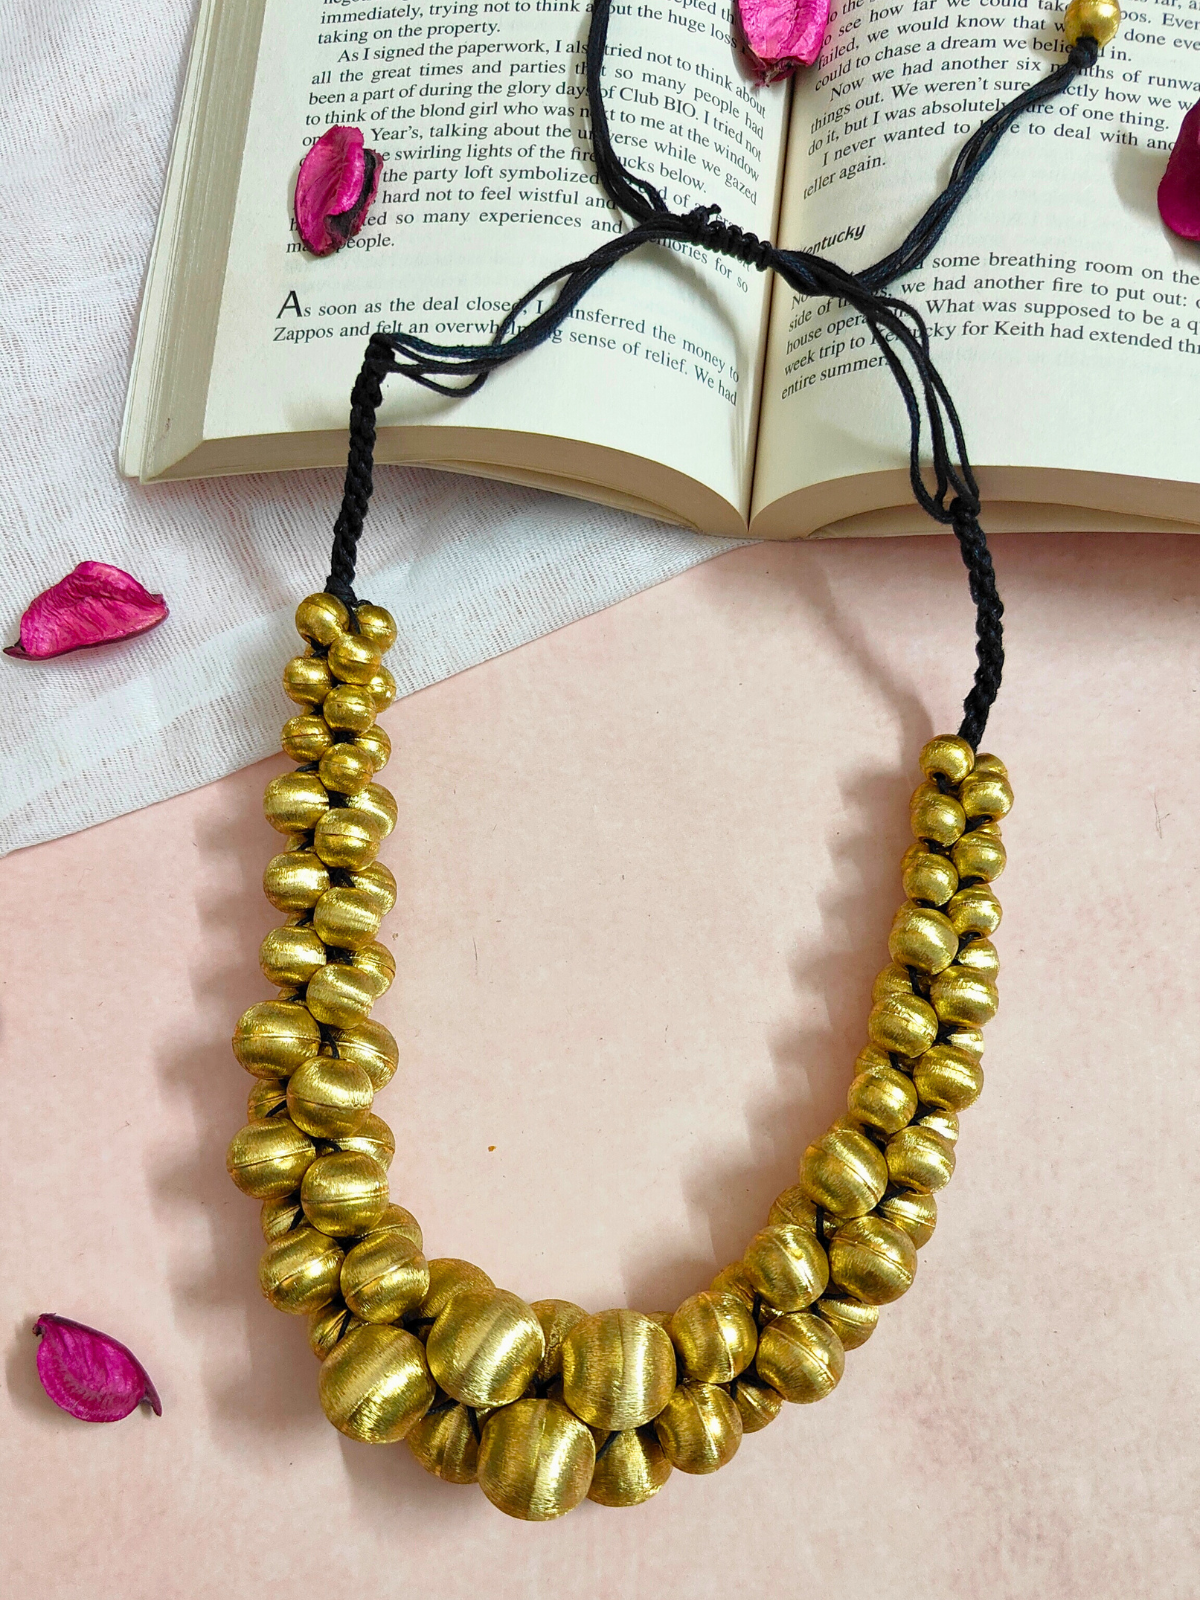 The Bunchy Goldy Pebble Necklace